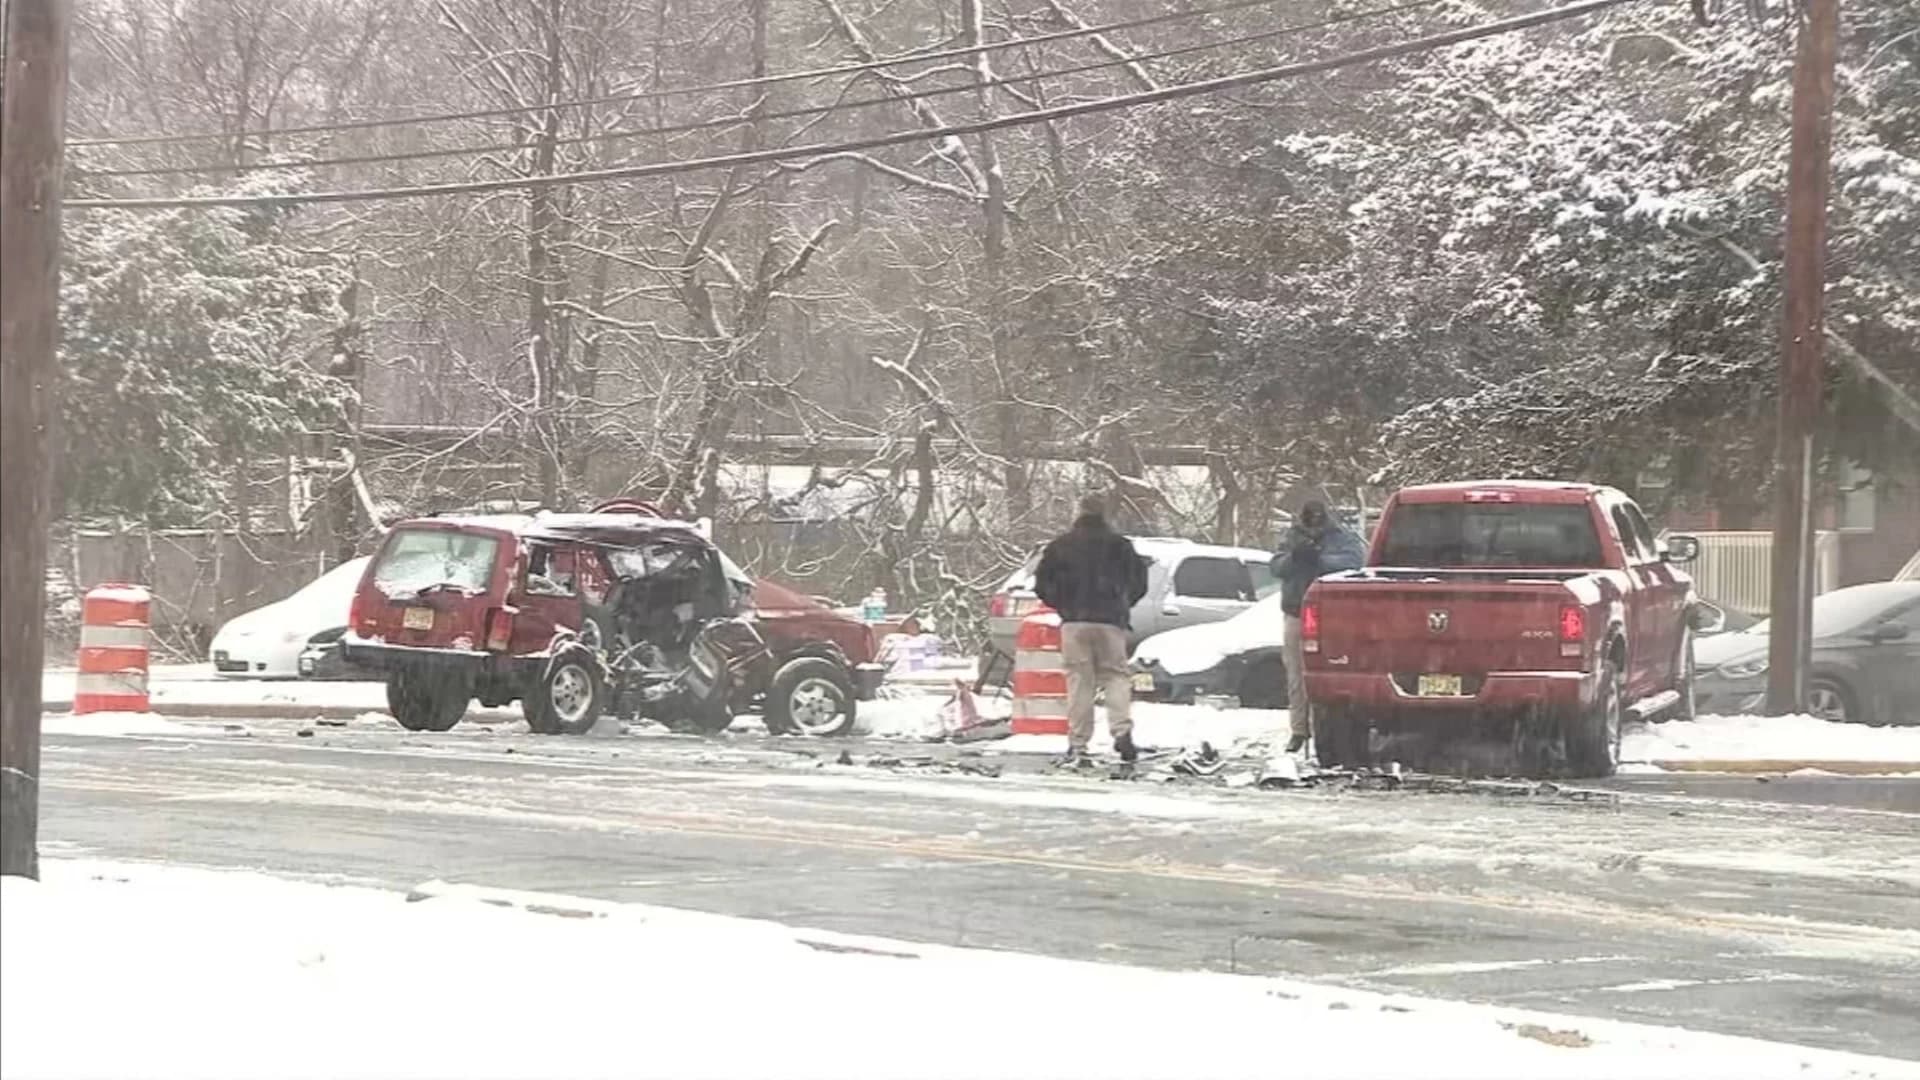 Police: 2 killed in vehicle crash amid winter storm in Pemberton